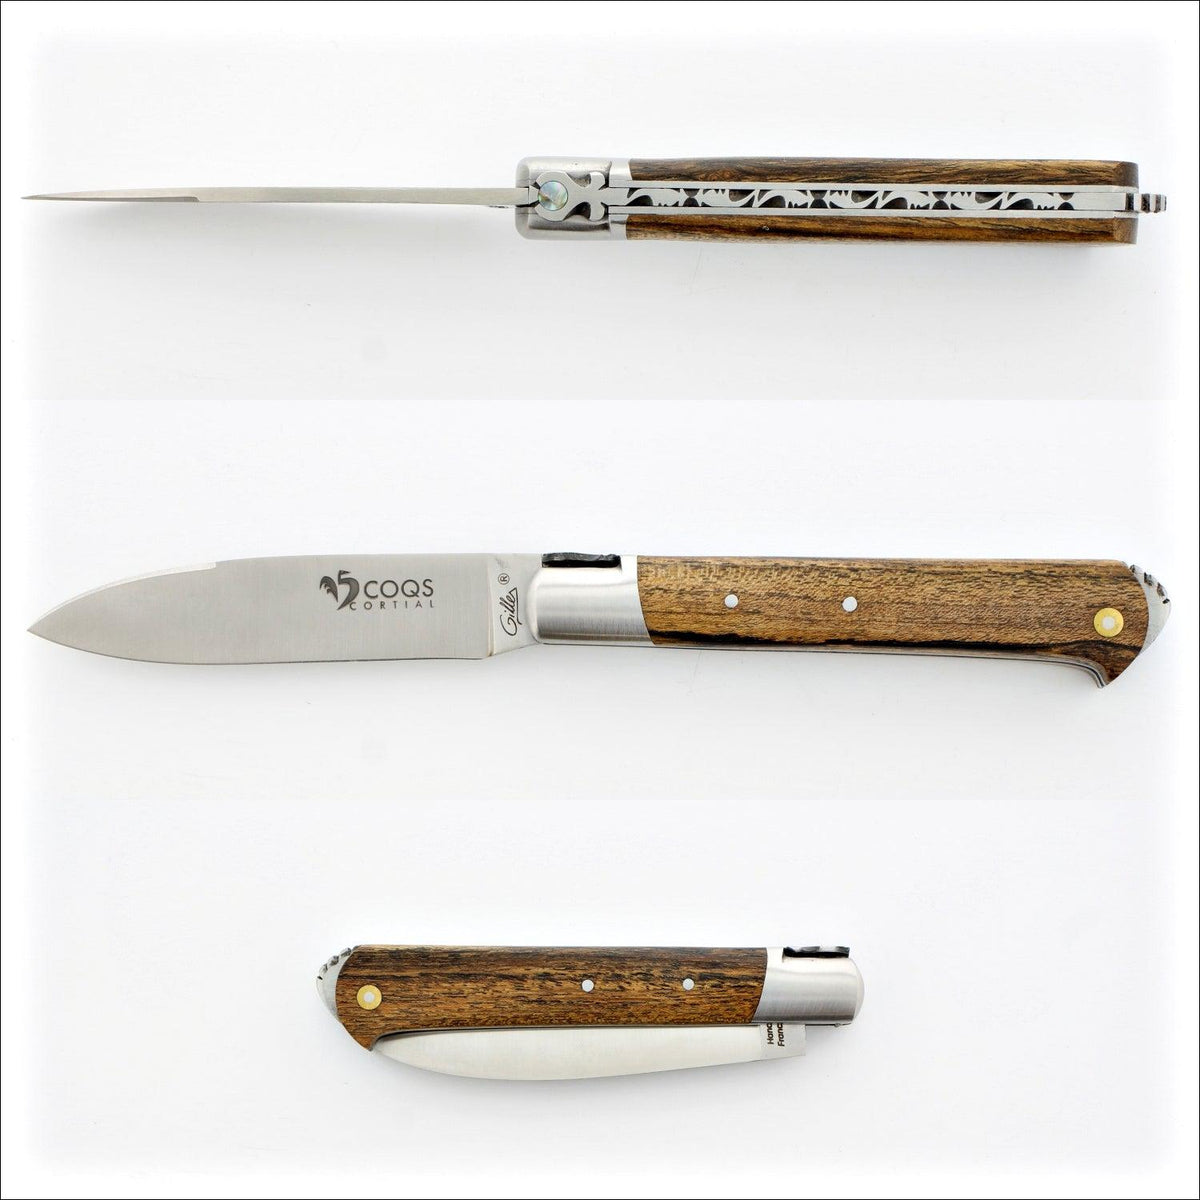 5 Coqs Pocket Knife - Bocote &amp; Mother of Pearl Inlay